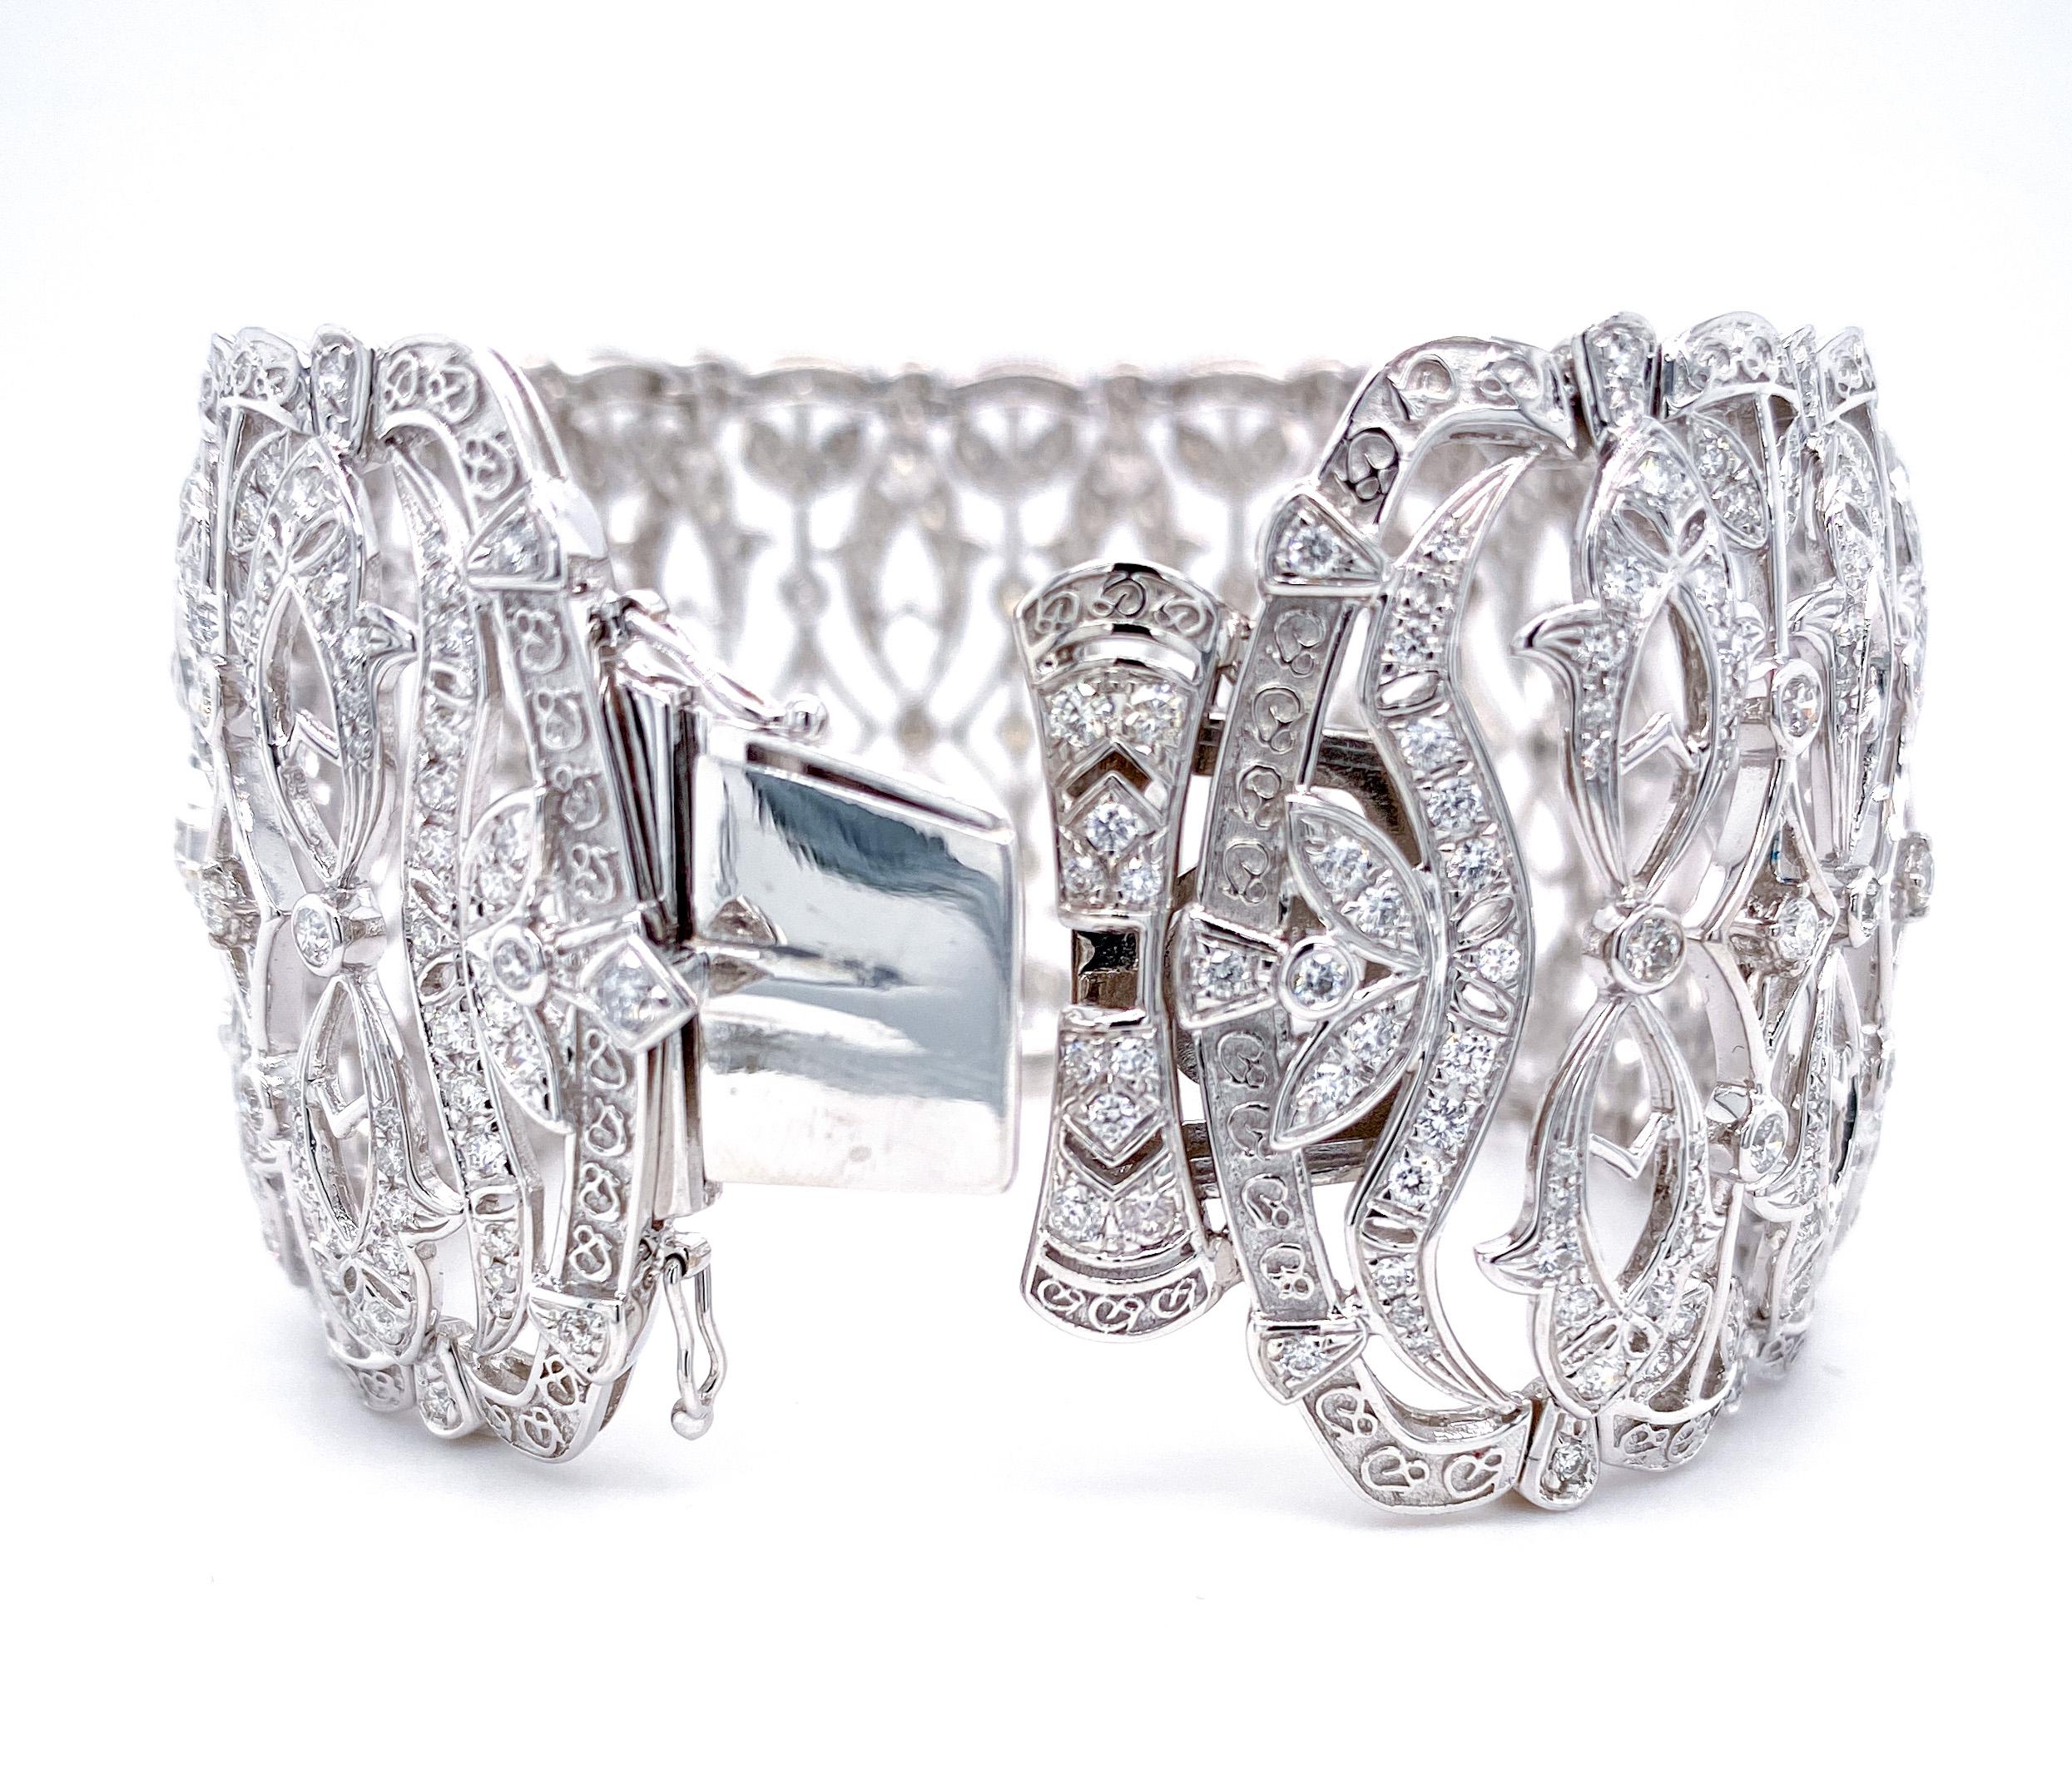 Lace Inspired Diamond Bangle Bracelet in 18 Karat White Gold In New Condition For Sale In Hong Kong, HK